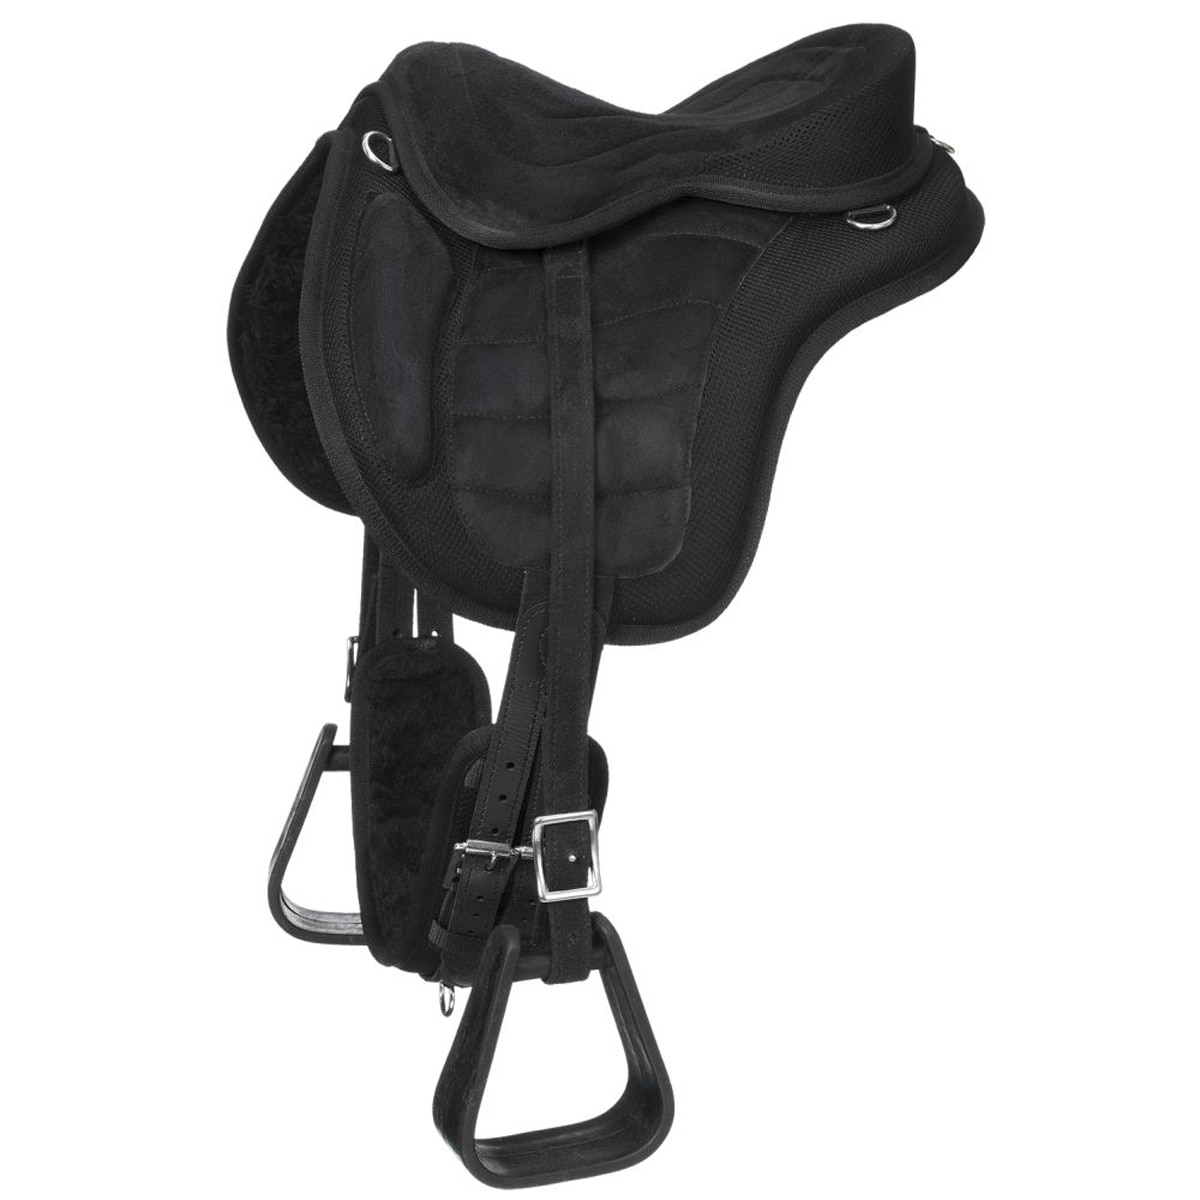 New treeless synthetic saddle black all size matching Girth 